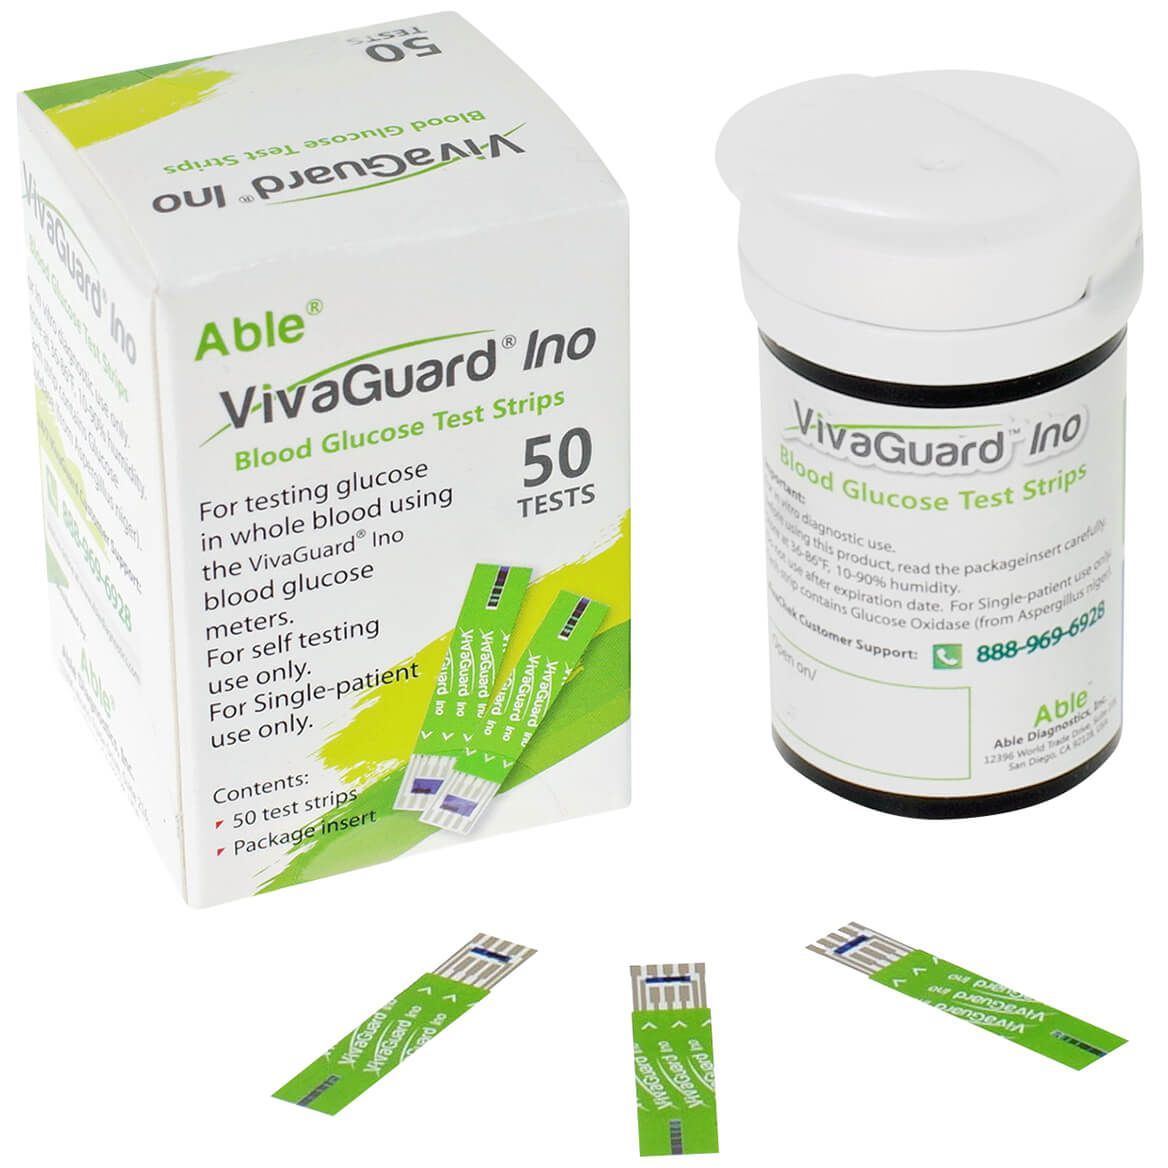 Able™ VivaGuard™ Ino Blood Glucose Test Strips, Set of 50 + '-' + 373366